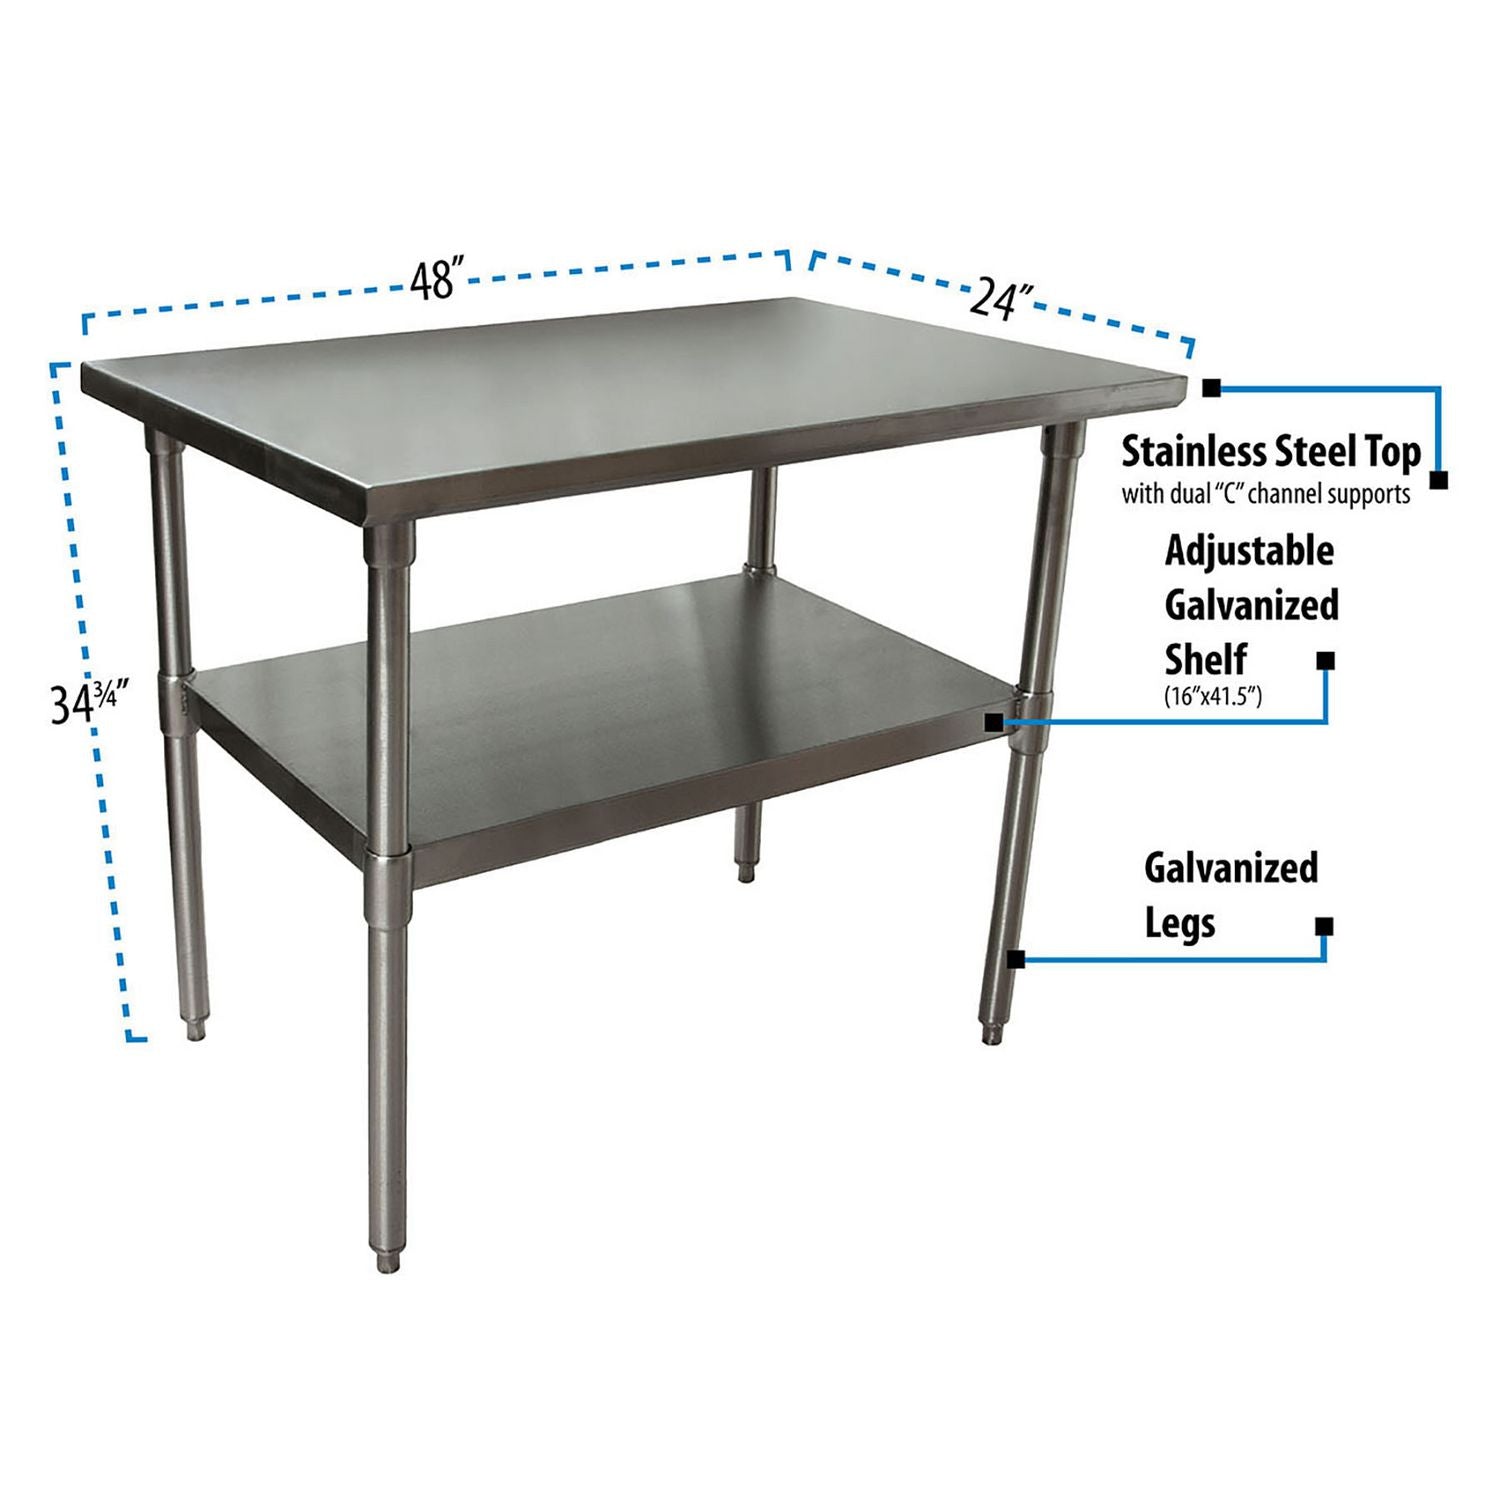 Stainless Steel Flat Top Work Tables, 48w x 24d x 36h, Silver, 2/Pallet, Ships in 4-6 Business Days - 3